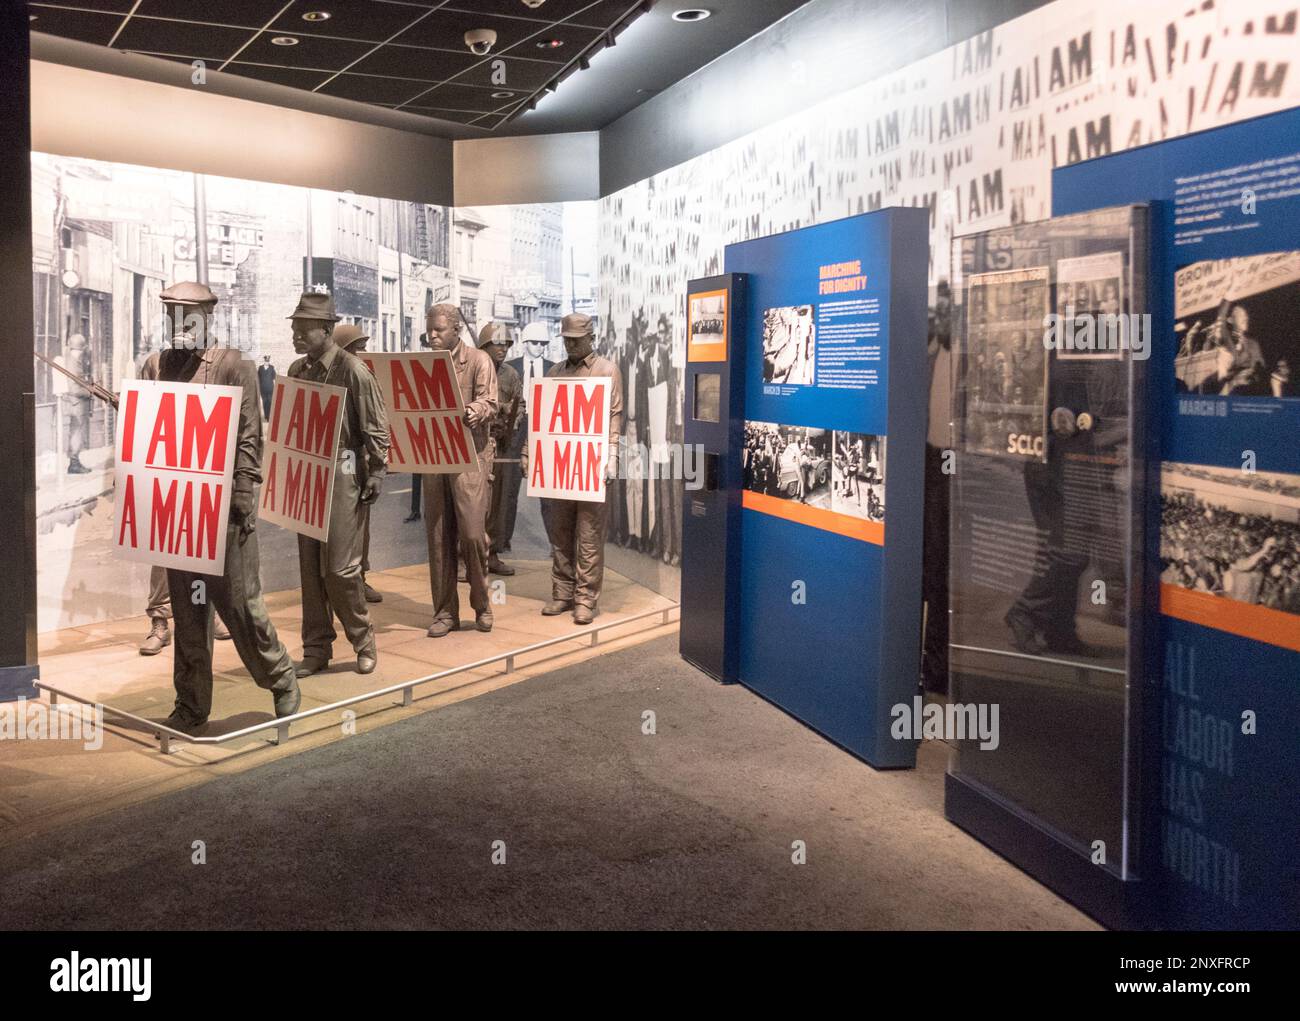 Interior of the National Civil Rights Museum, Lorraine Motel, Memphis, Tennessee, showing bronze sanitation workers with I Am a Man signs Stock Photo